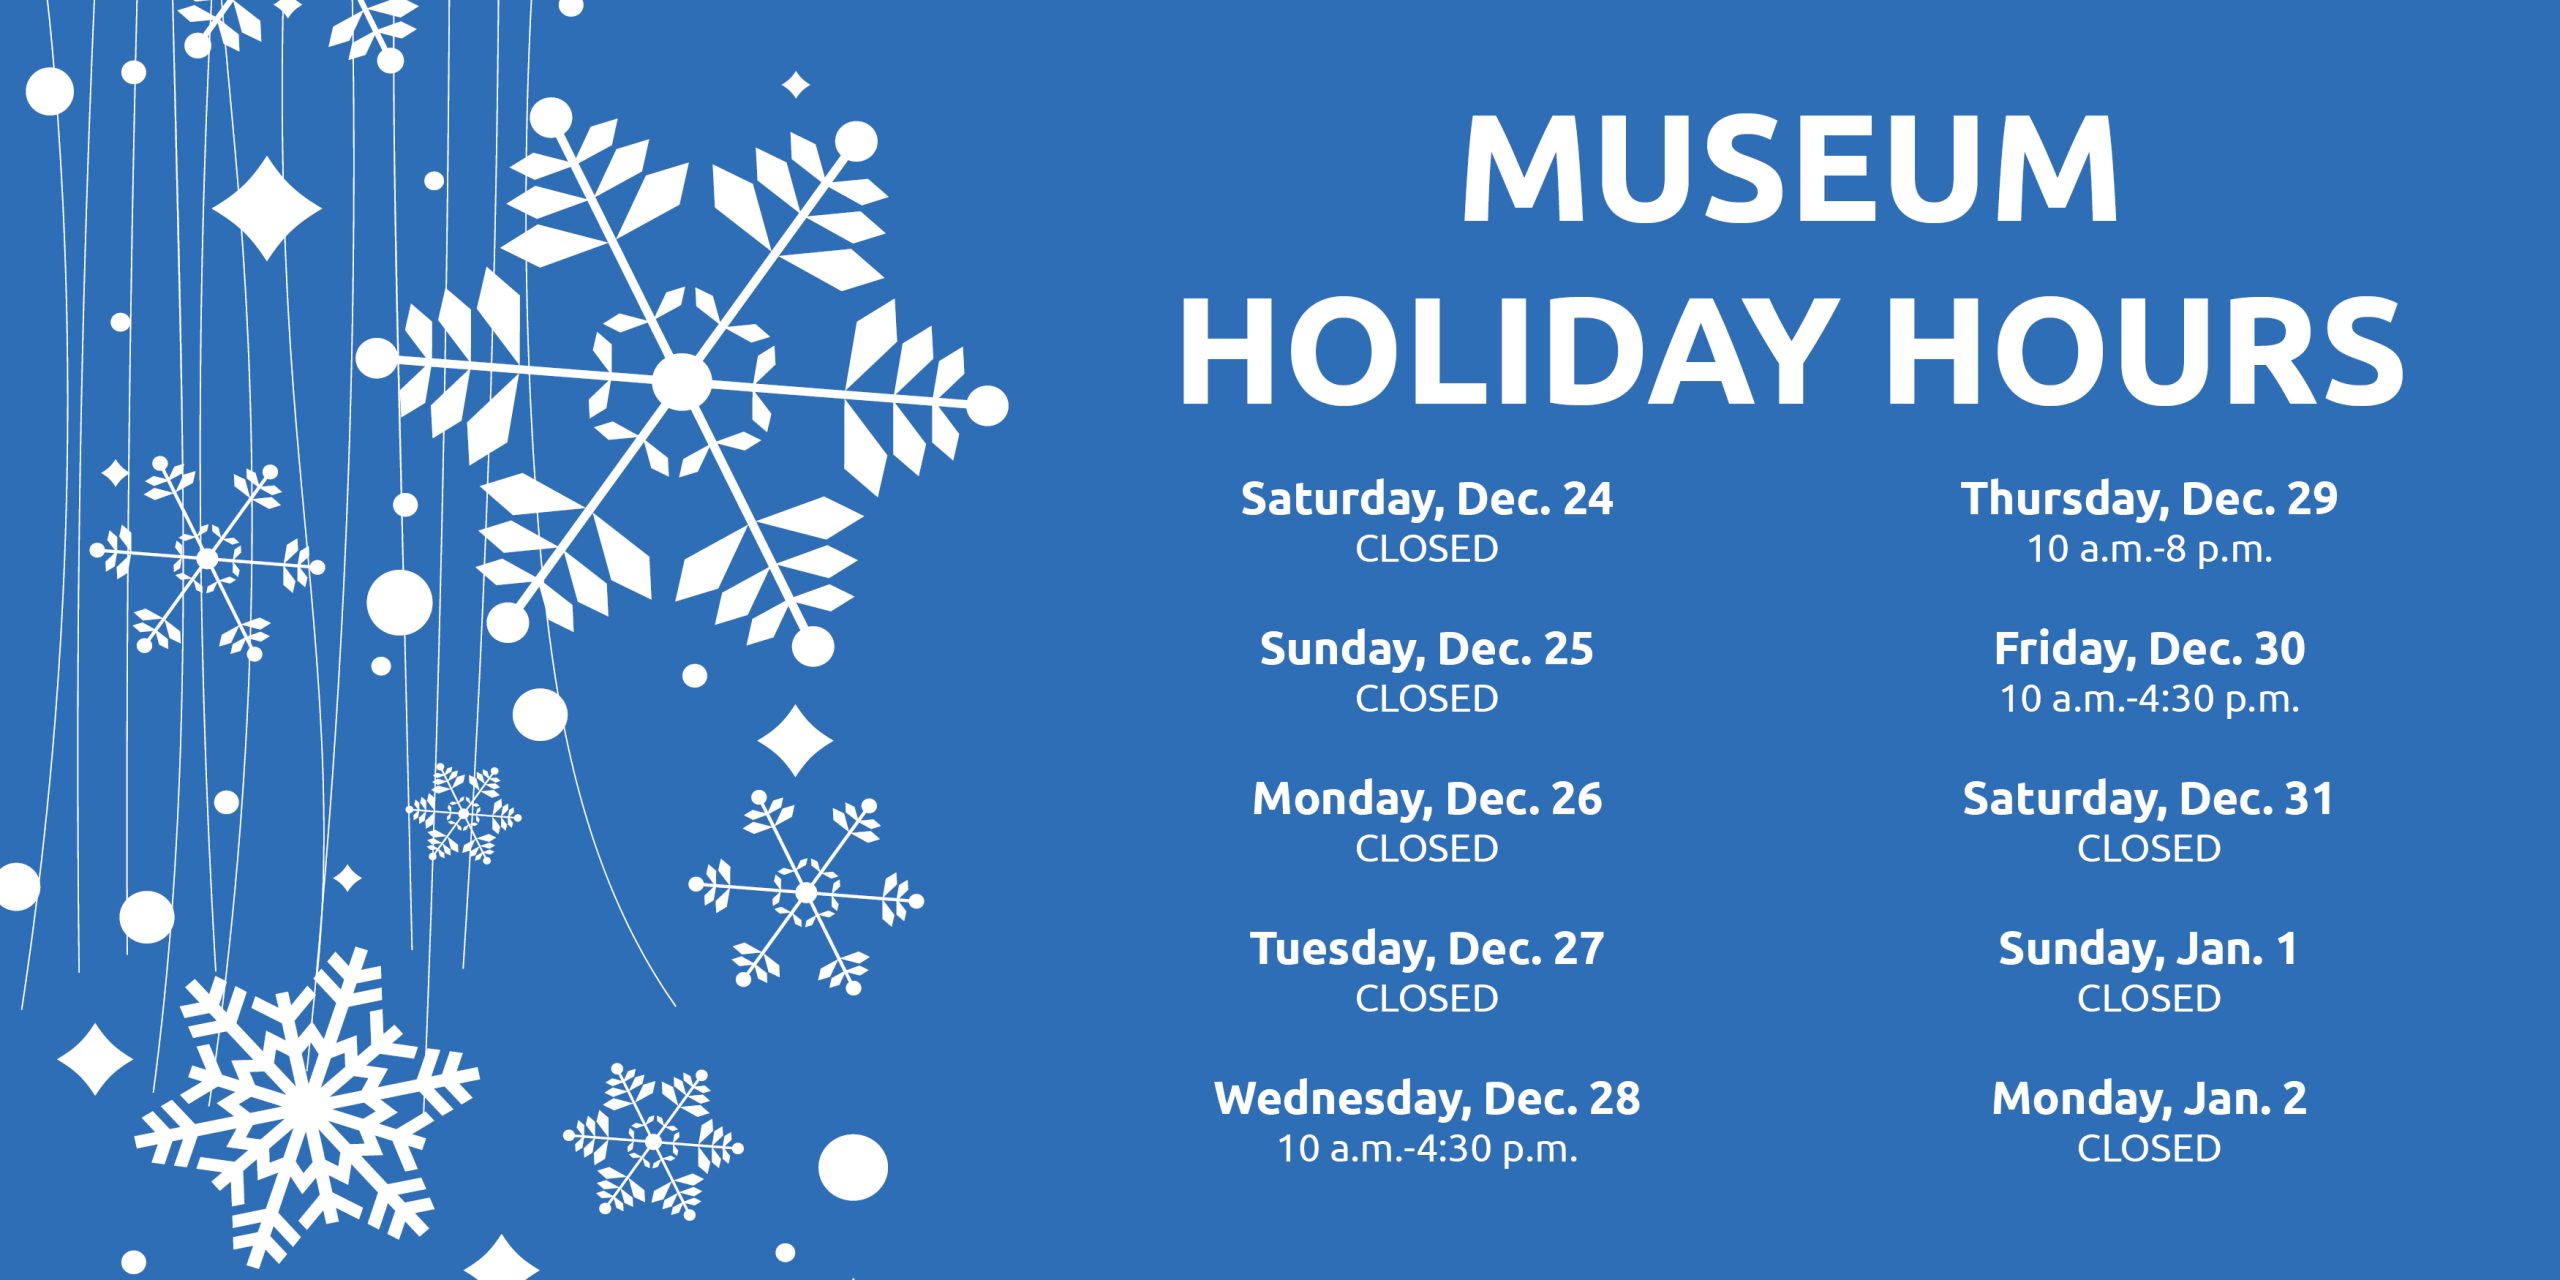 Illustration of snowflakes with text promoting holiday hours at the Museum